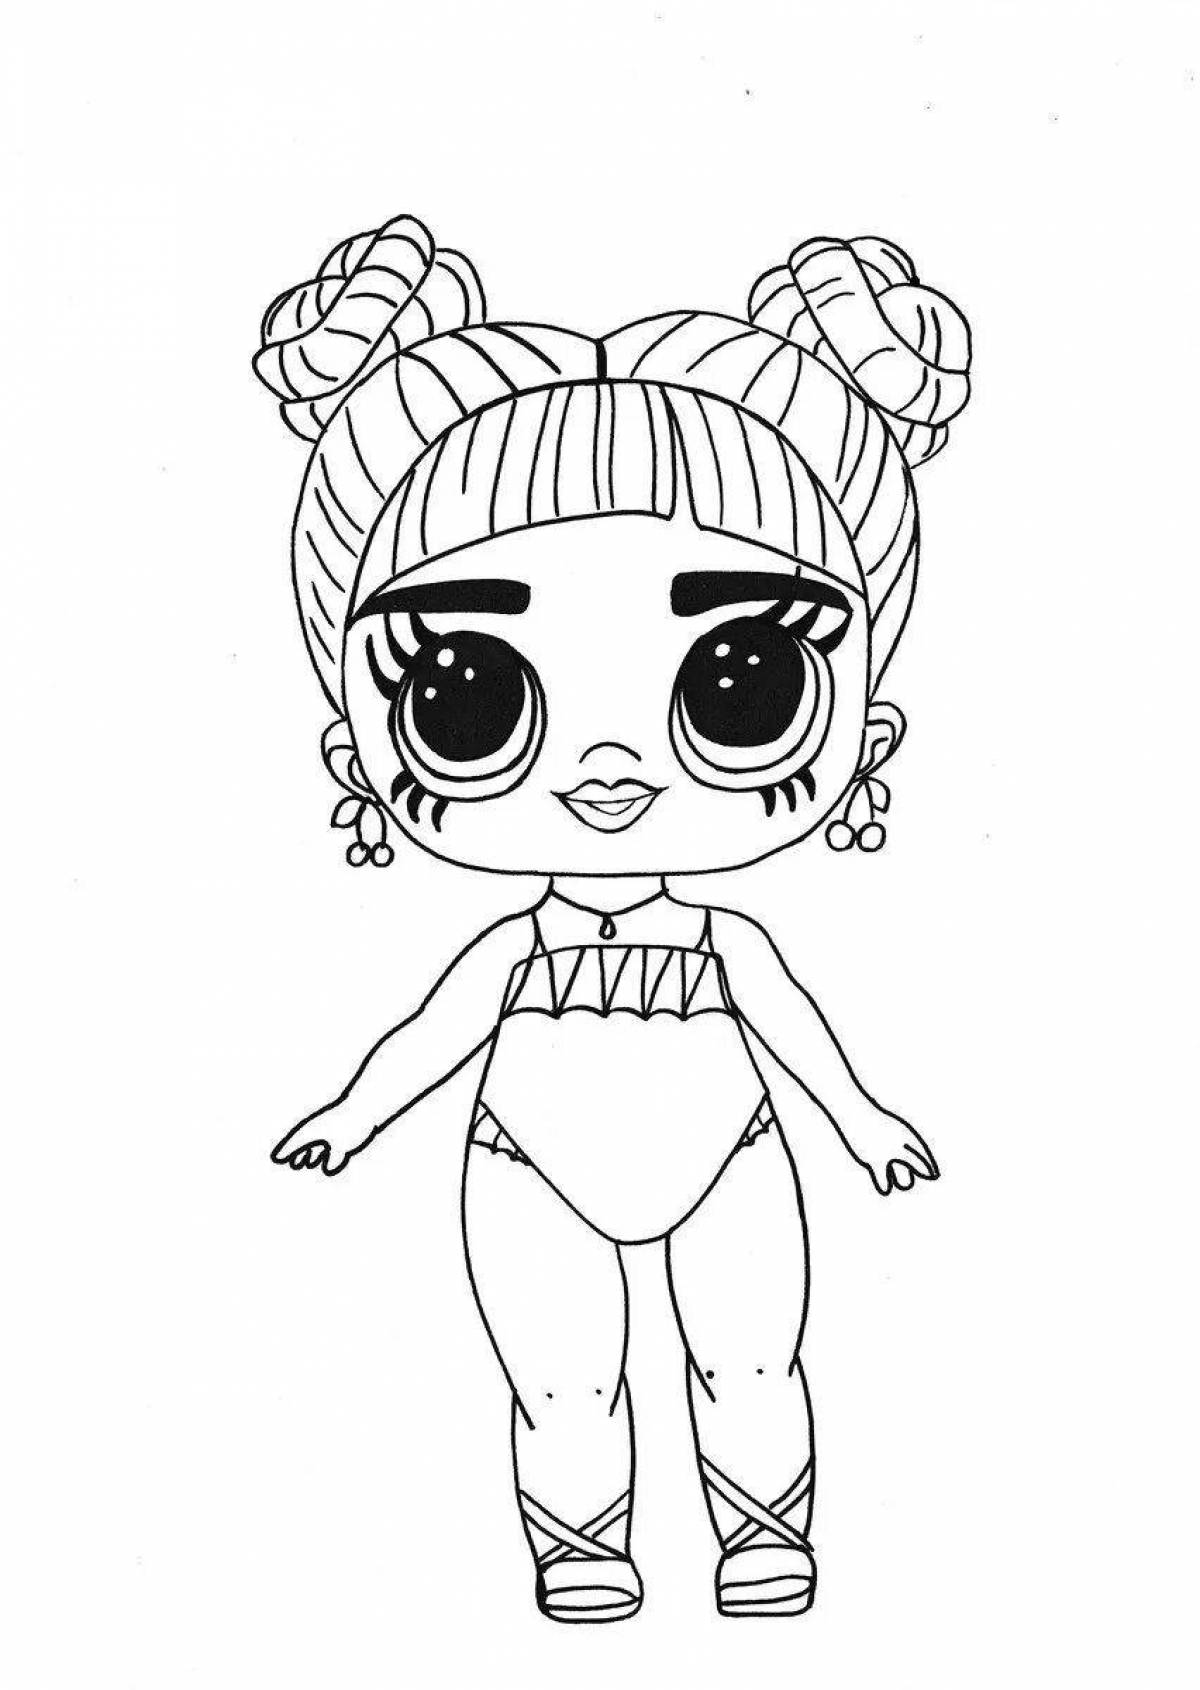 Surreal coloring lol doll in swimsuit